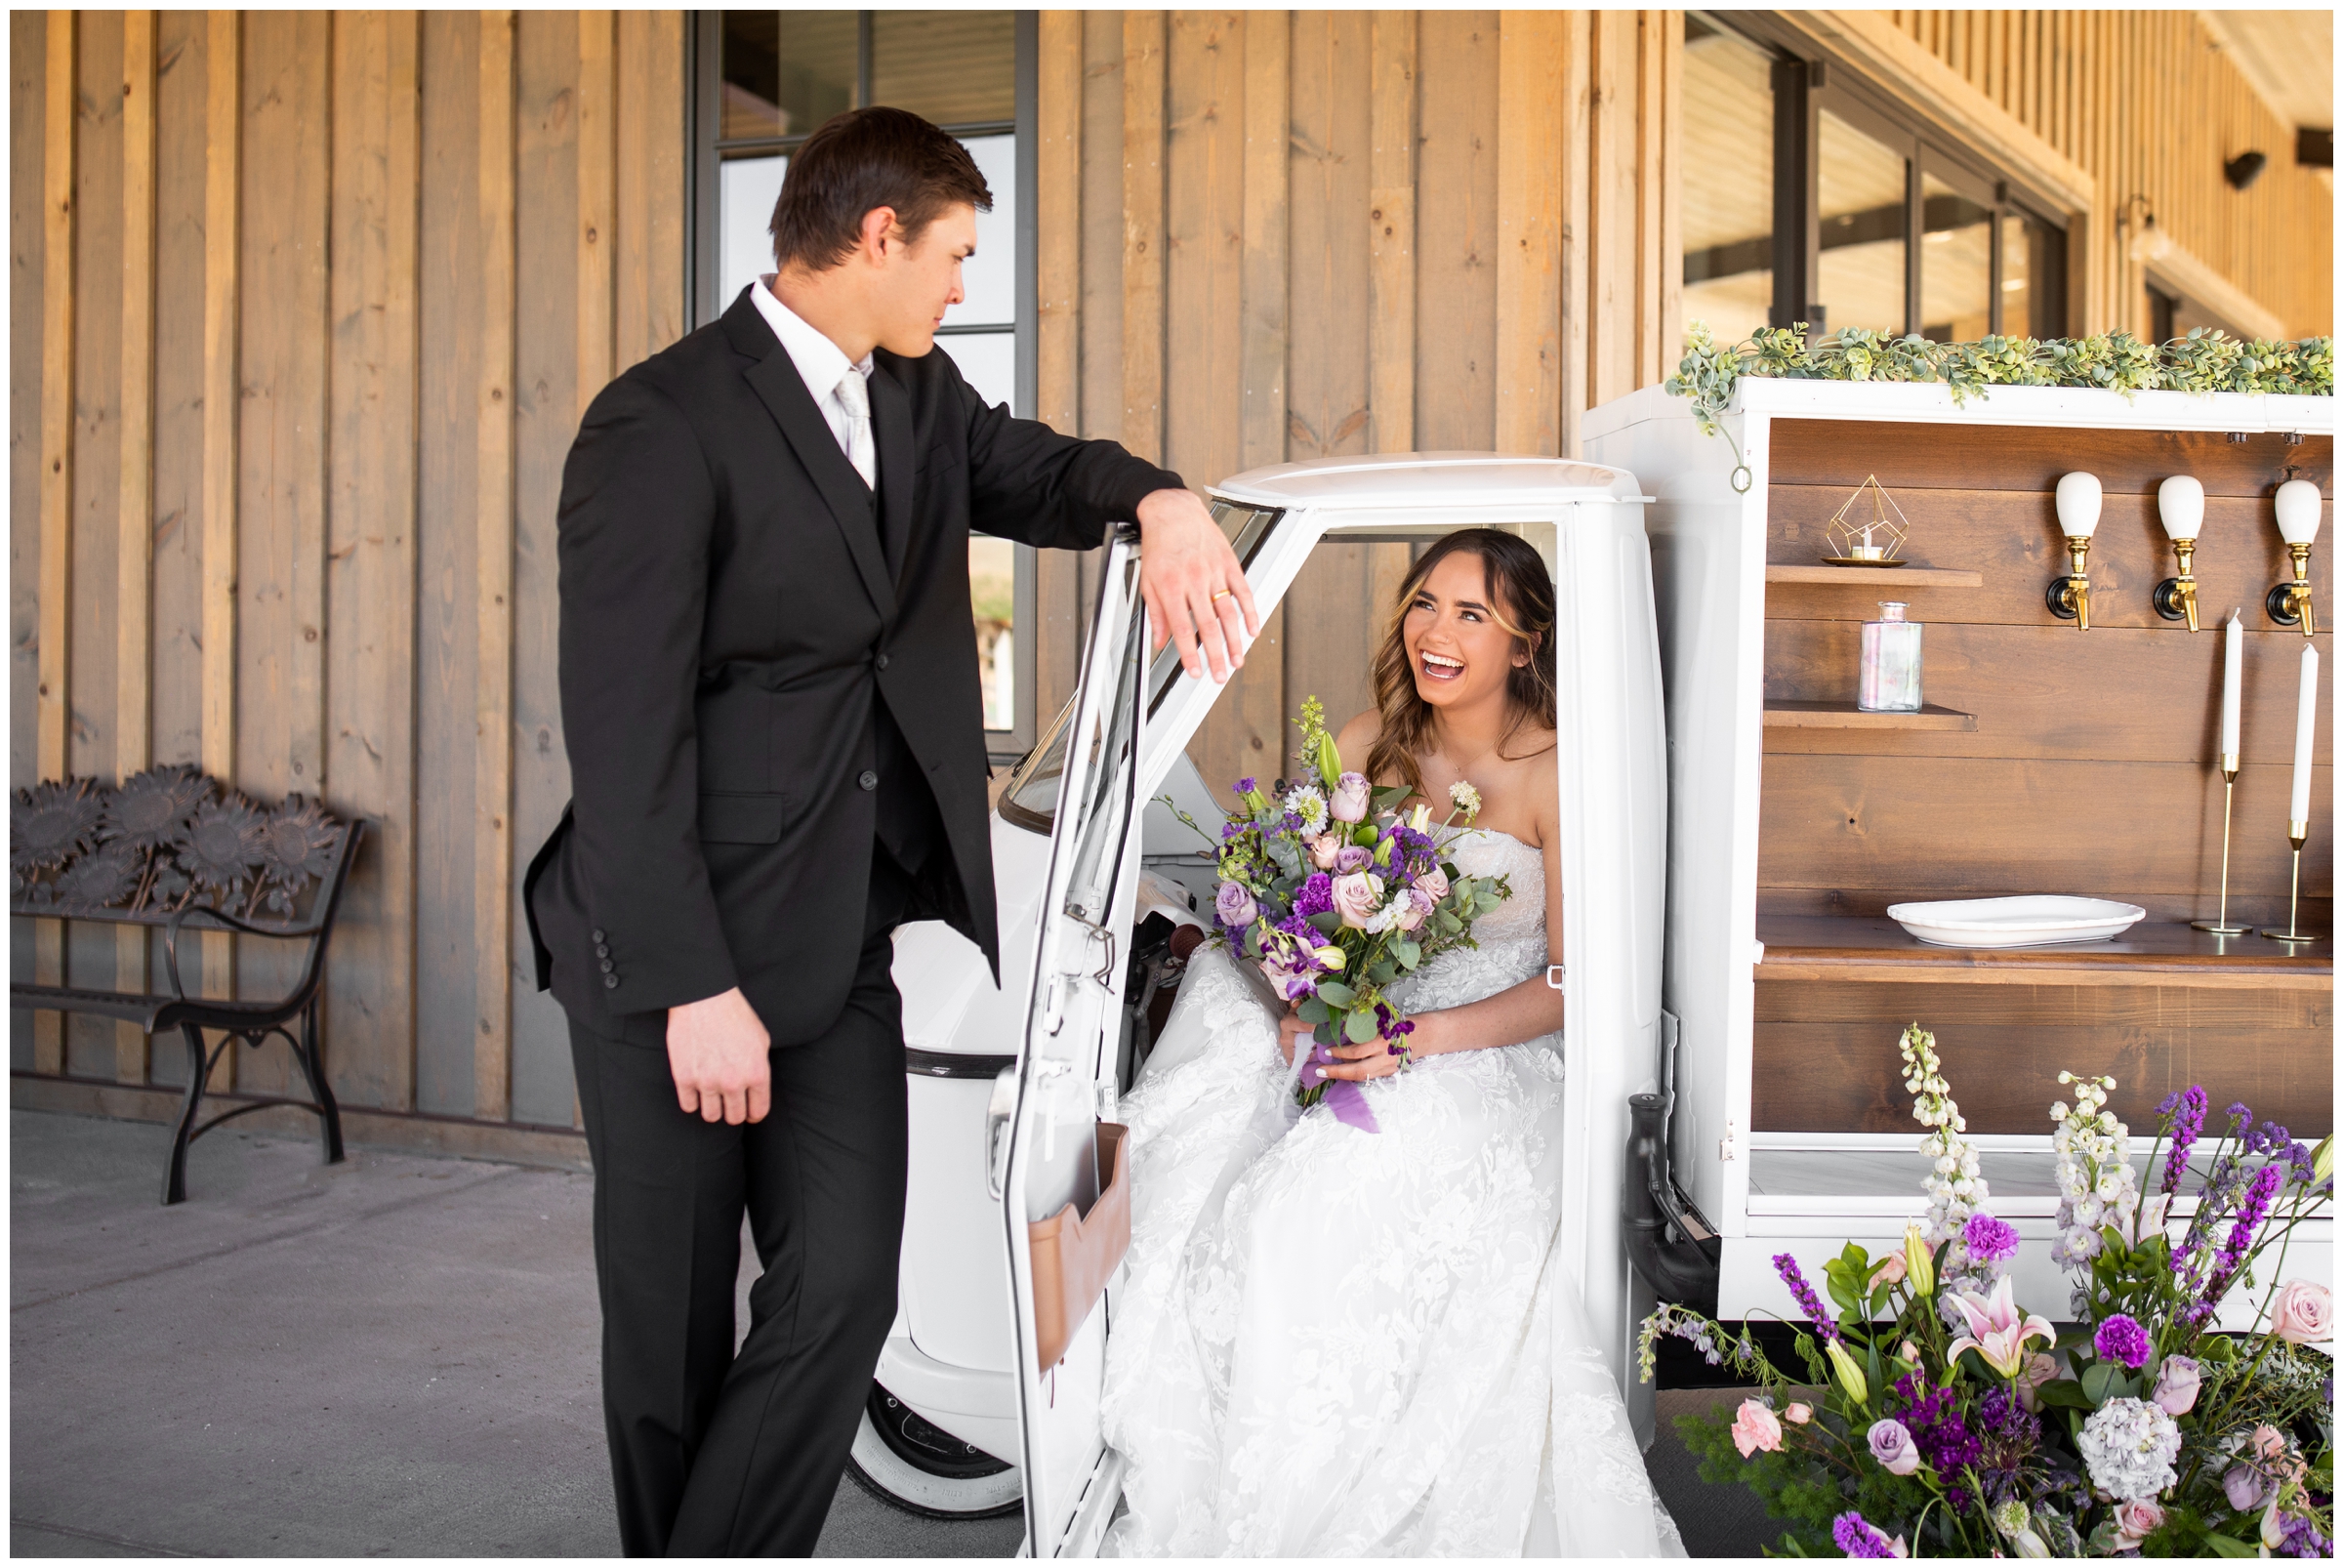 couple posing in La Piccolina mobile bar cart during Bonnie Blues Colorado wedding photos by Plum Pretty Photography